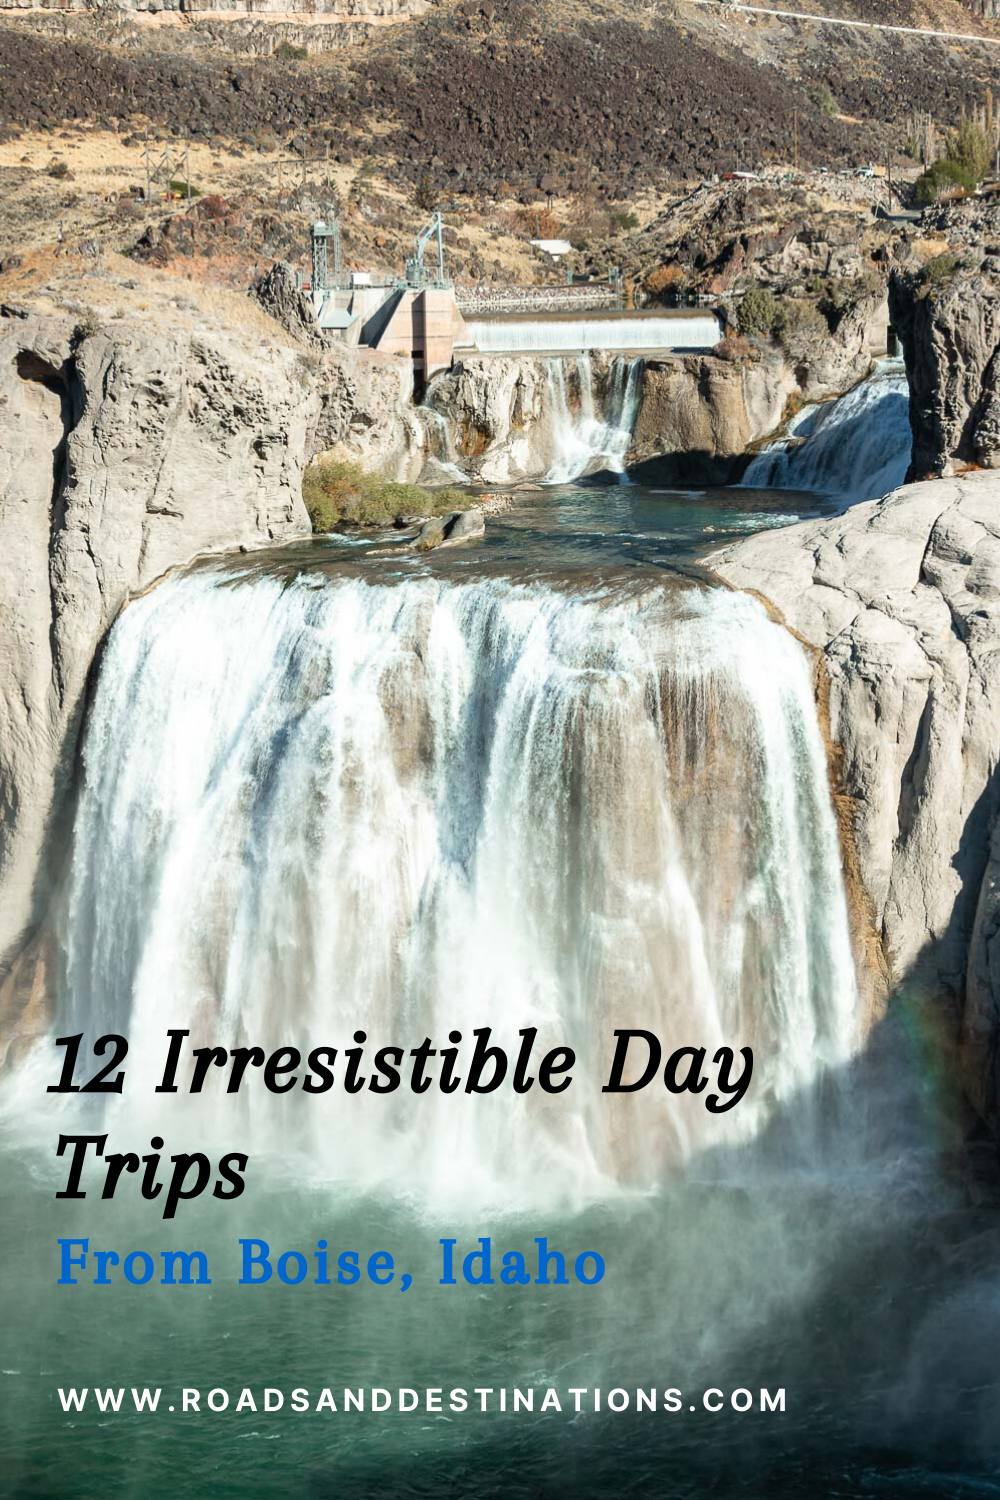 Day trips from Boise, Idaho - Roads and Destinations